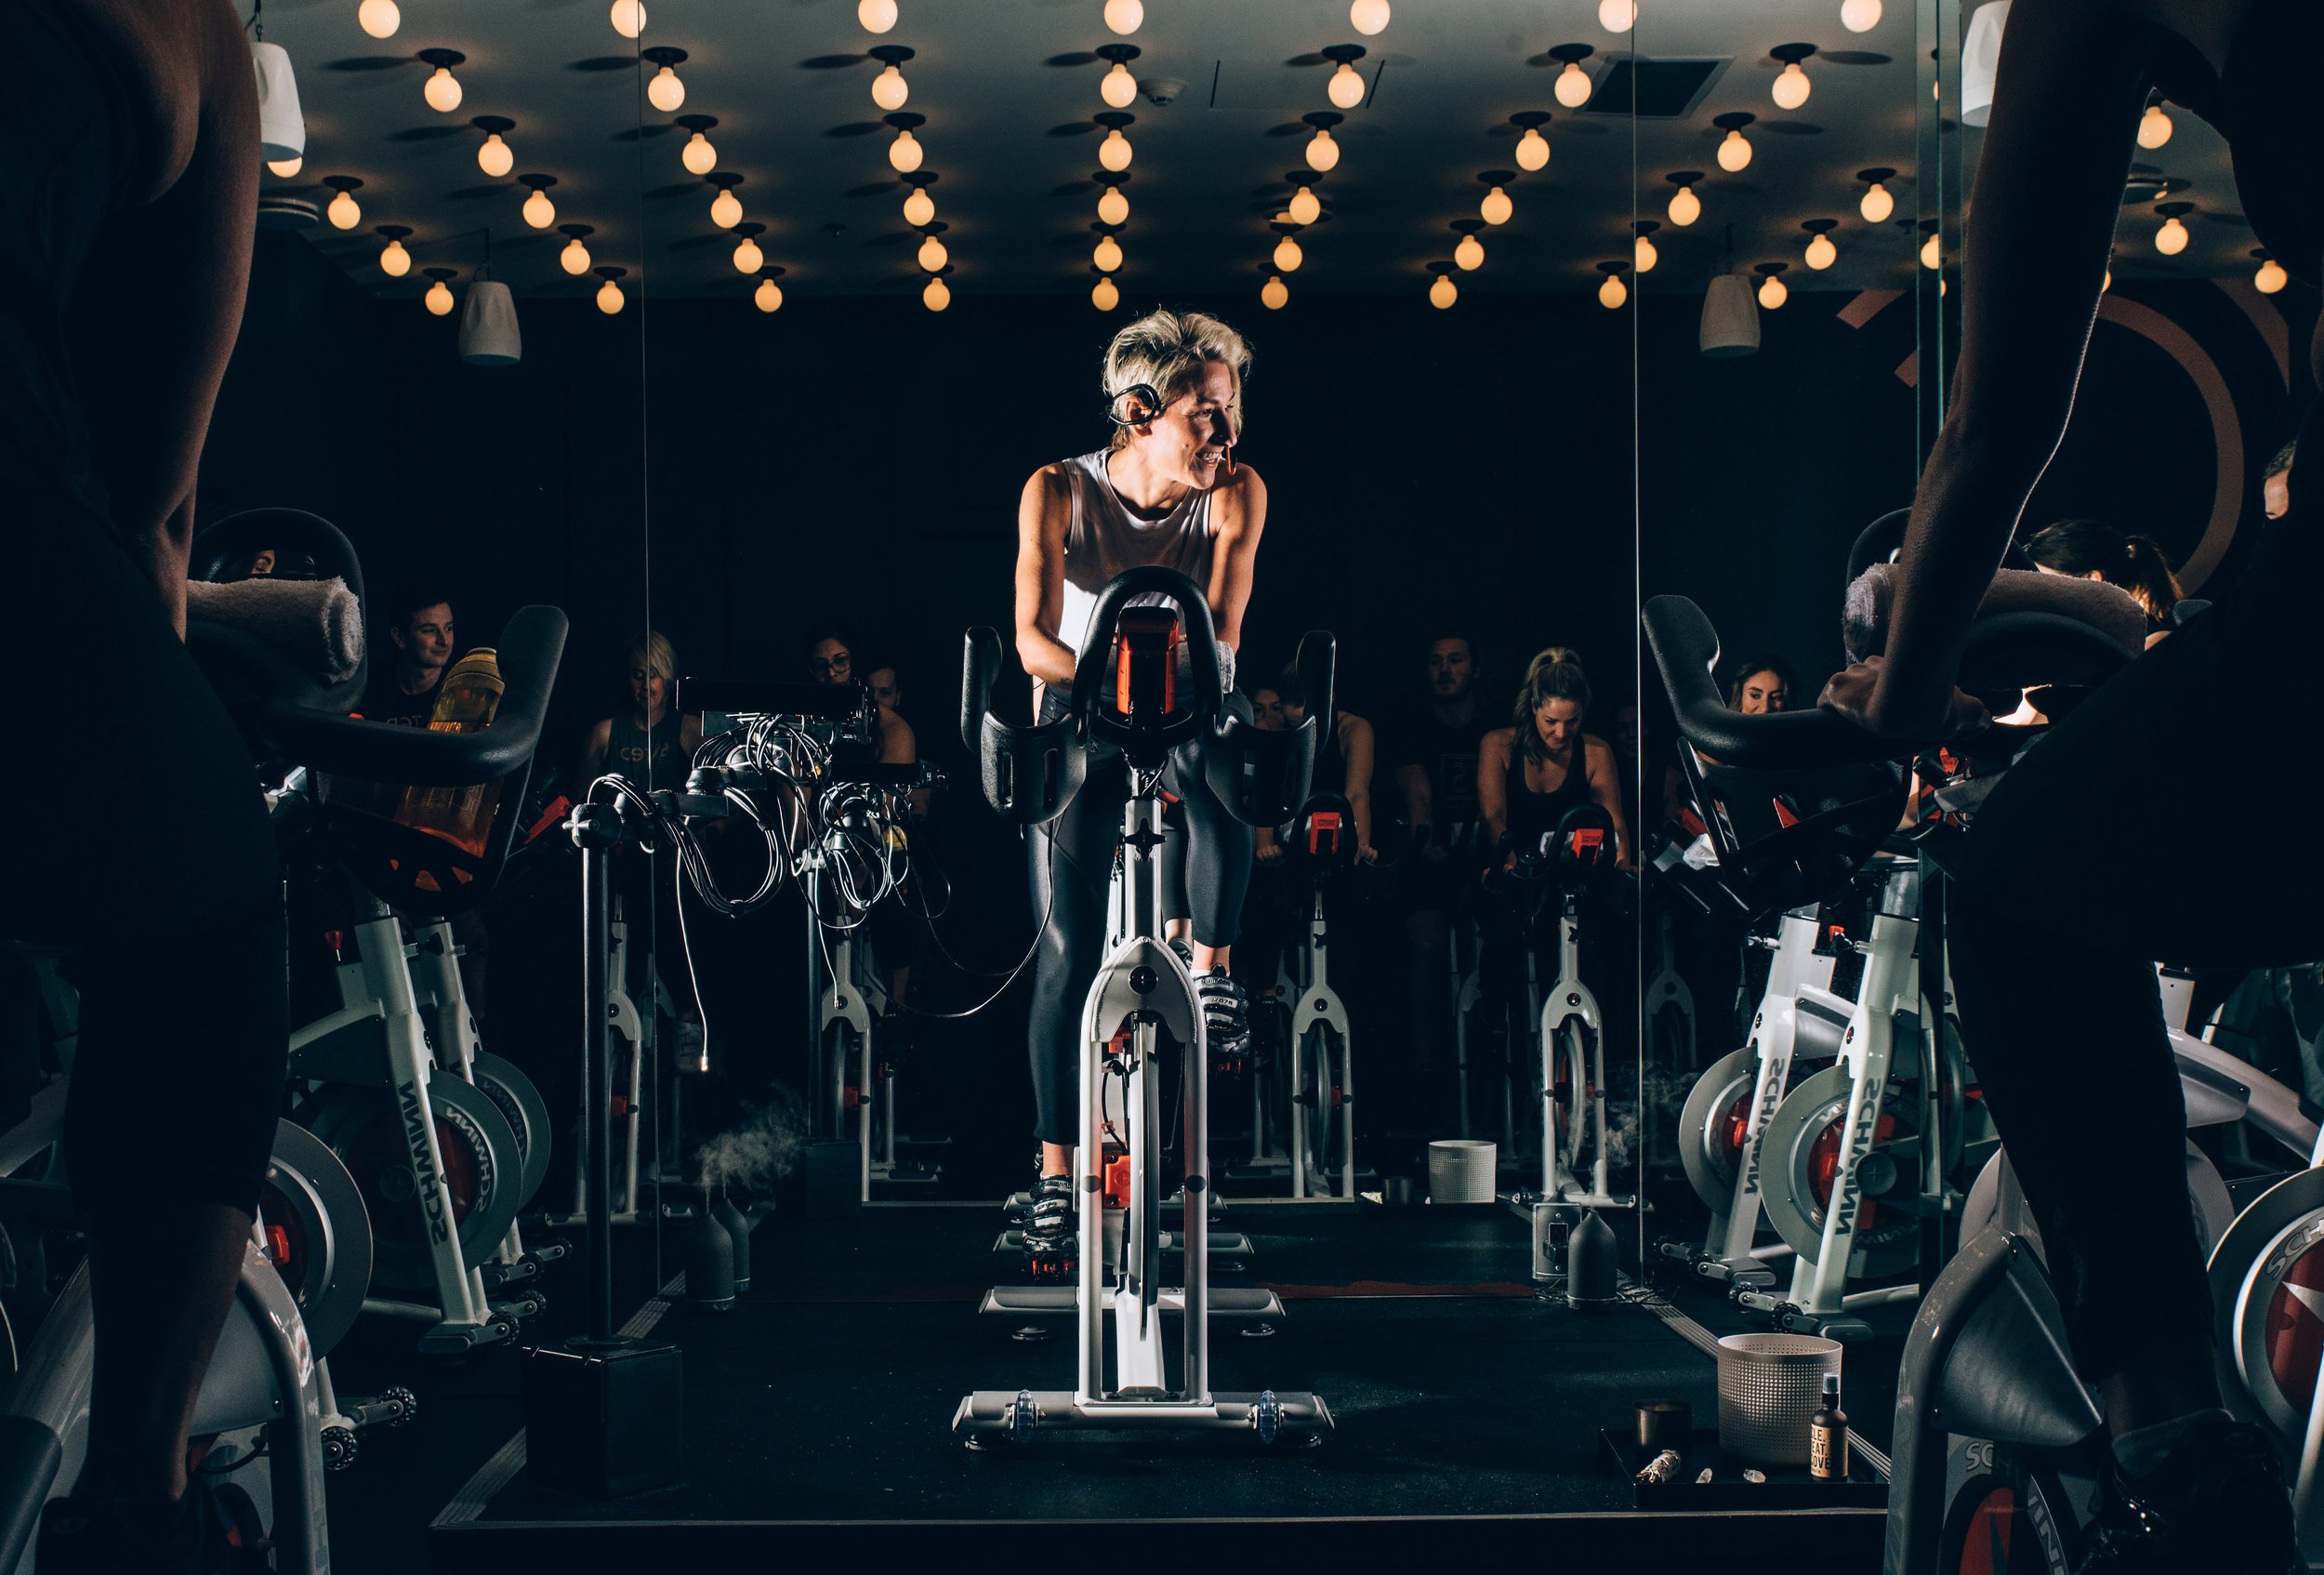 Millie_SaltedCycle_BenOwensPhotography_GroupSpinClass.jpeg